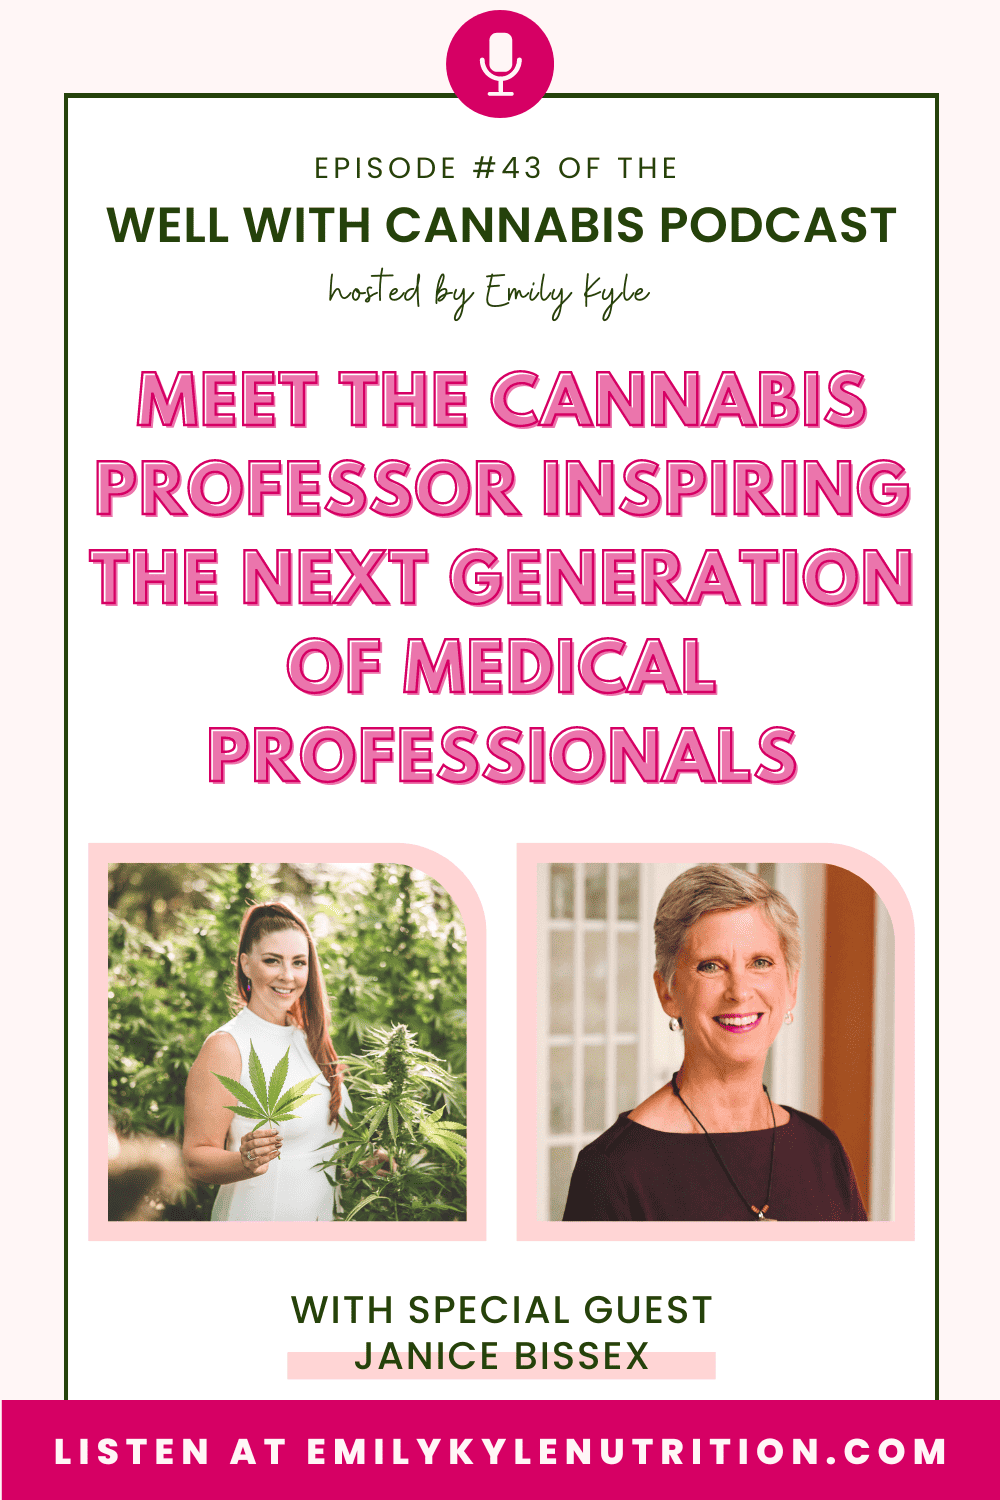 A picture of Janice Bissesx, a guest on the Well With Cannabis podcast.